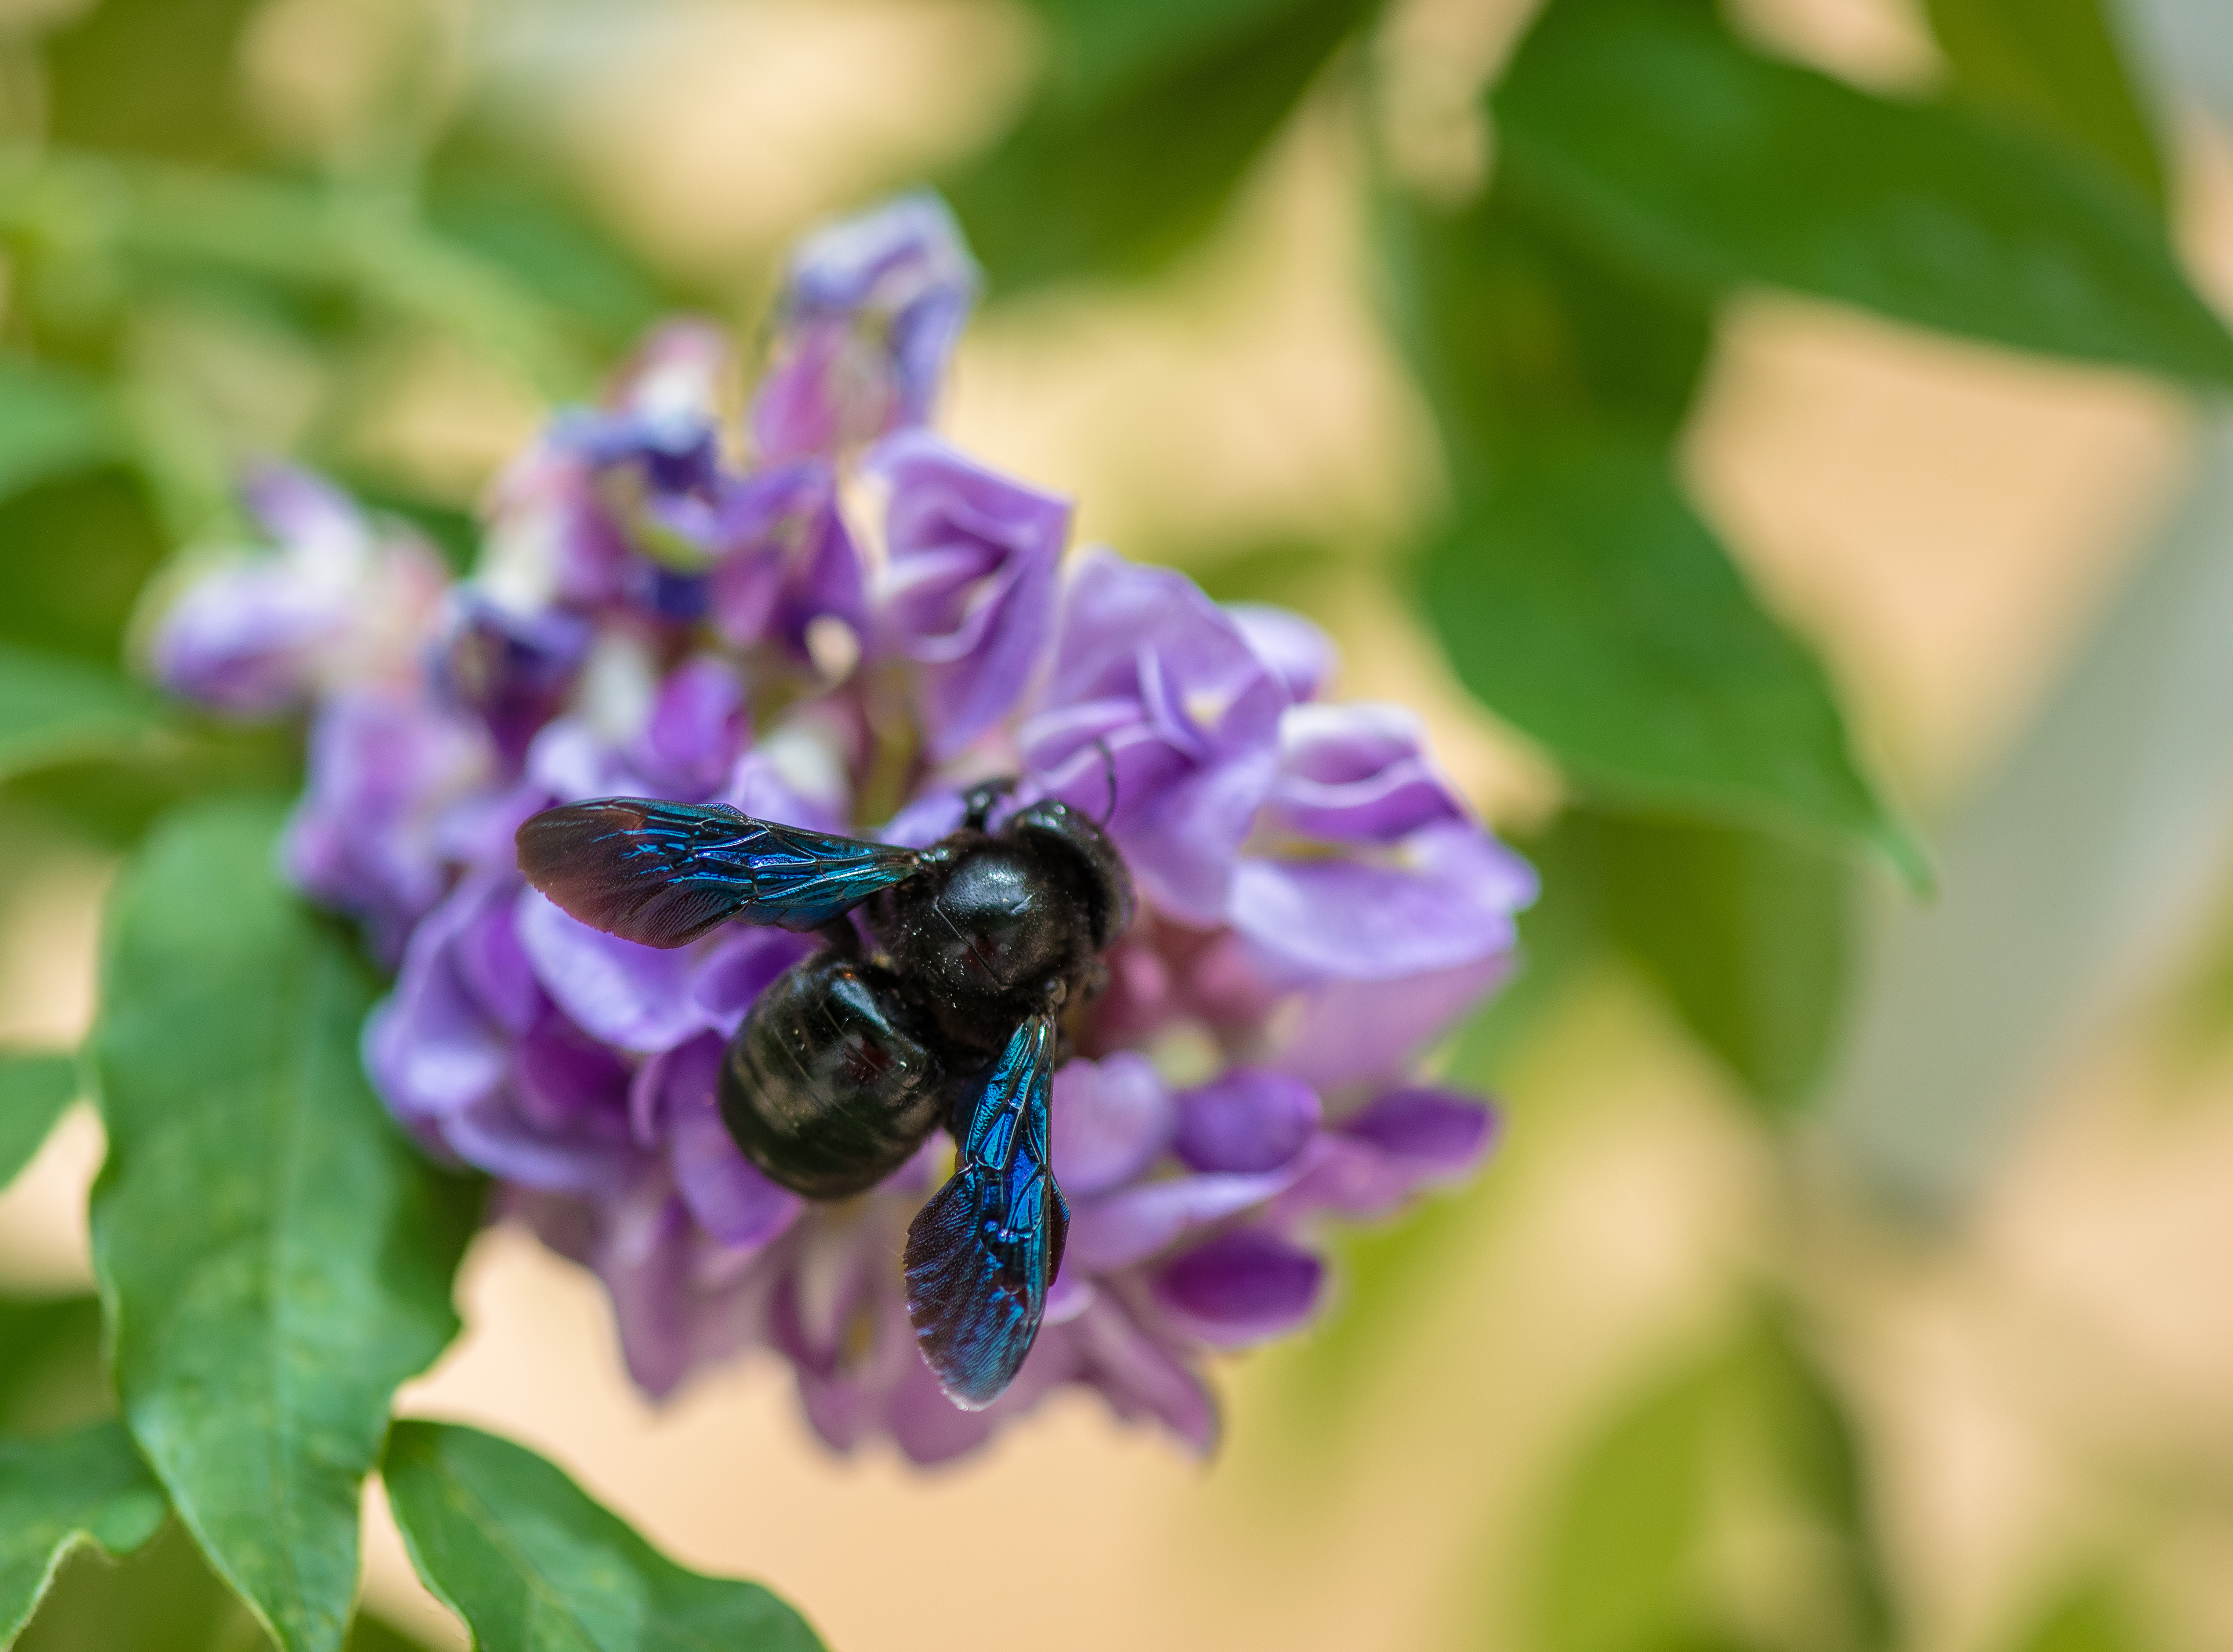 The Carpenter Bee belongs to the genus Xylocopa and there are over 730 species of the carpenter bee in the world.